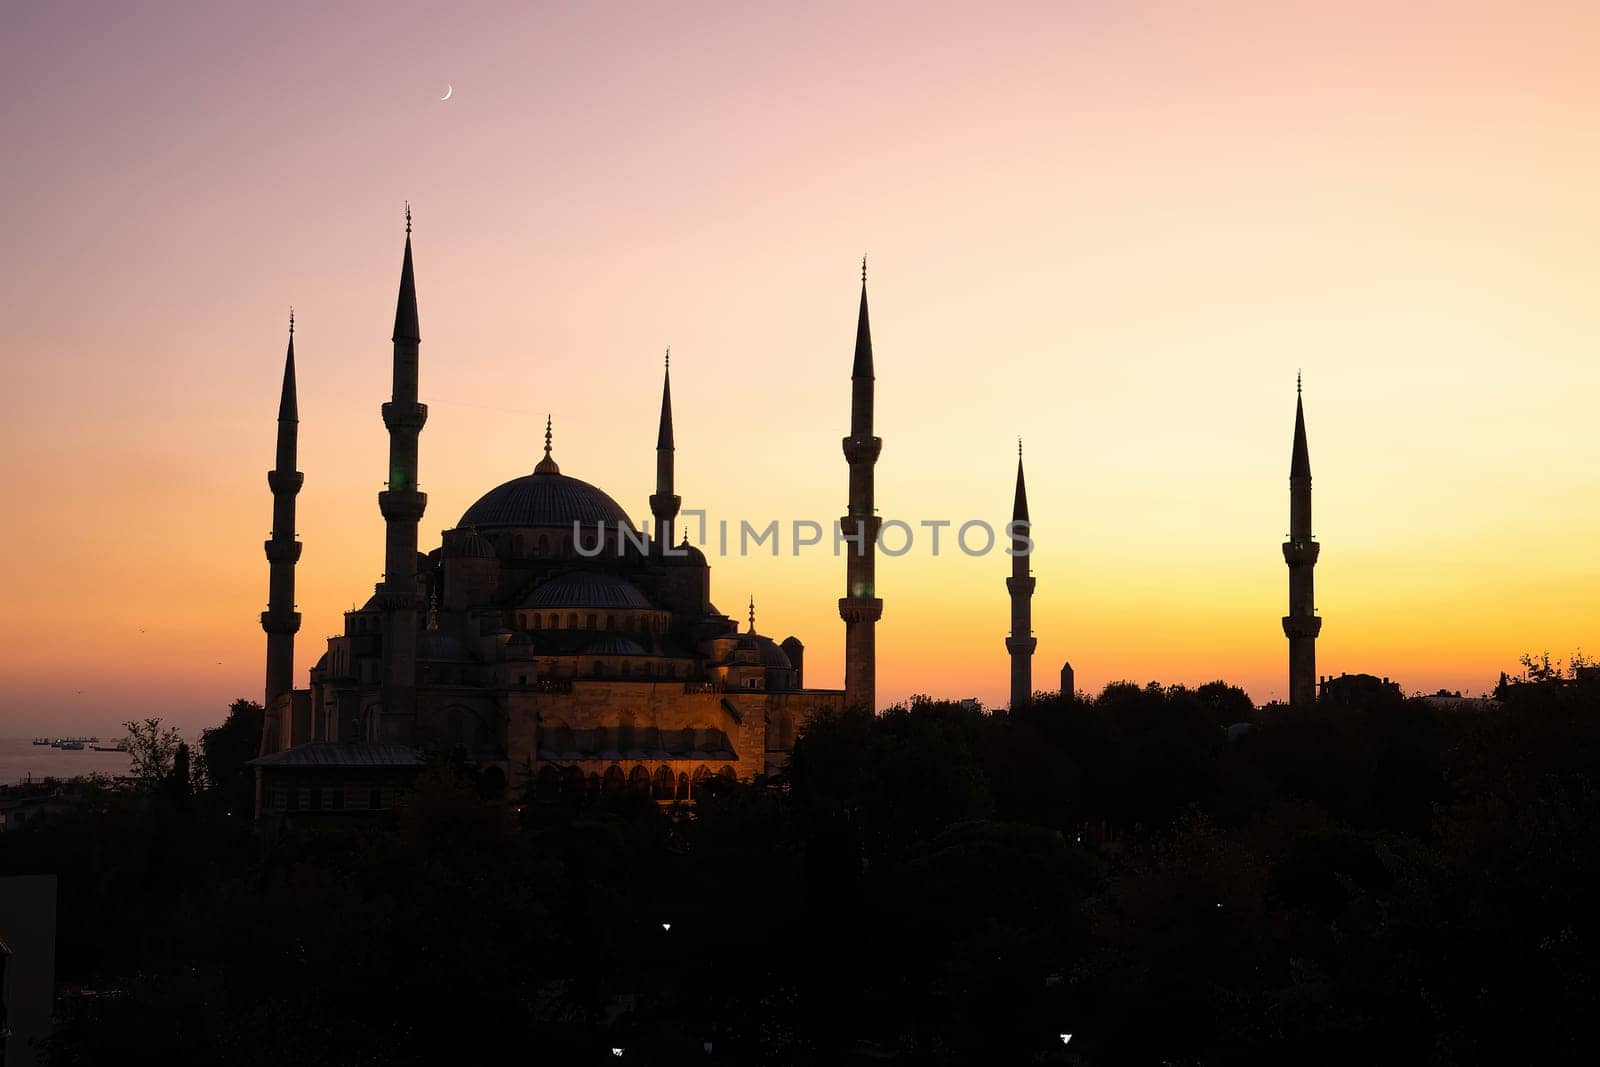 The Sultanahmet Mosque (Blue Mosque) in Istanbul, Turkey by f11photo